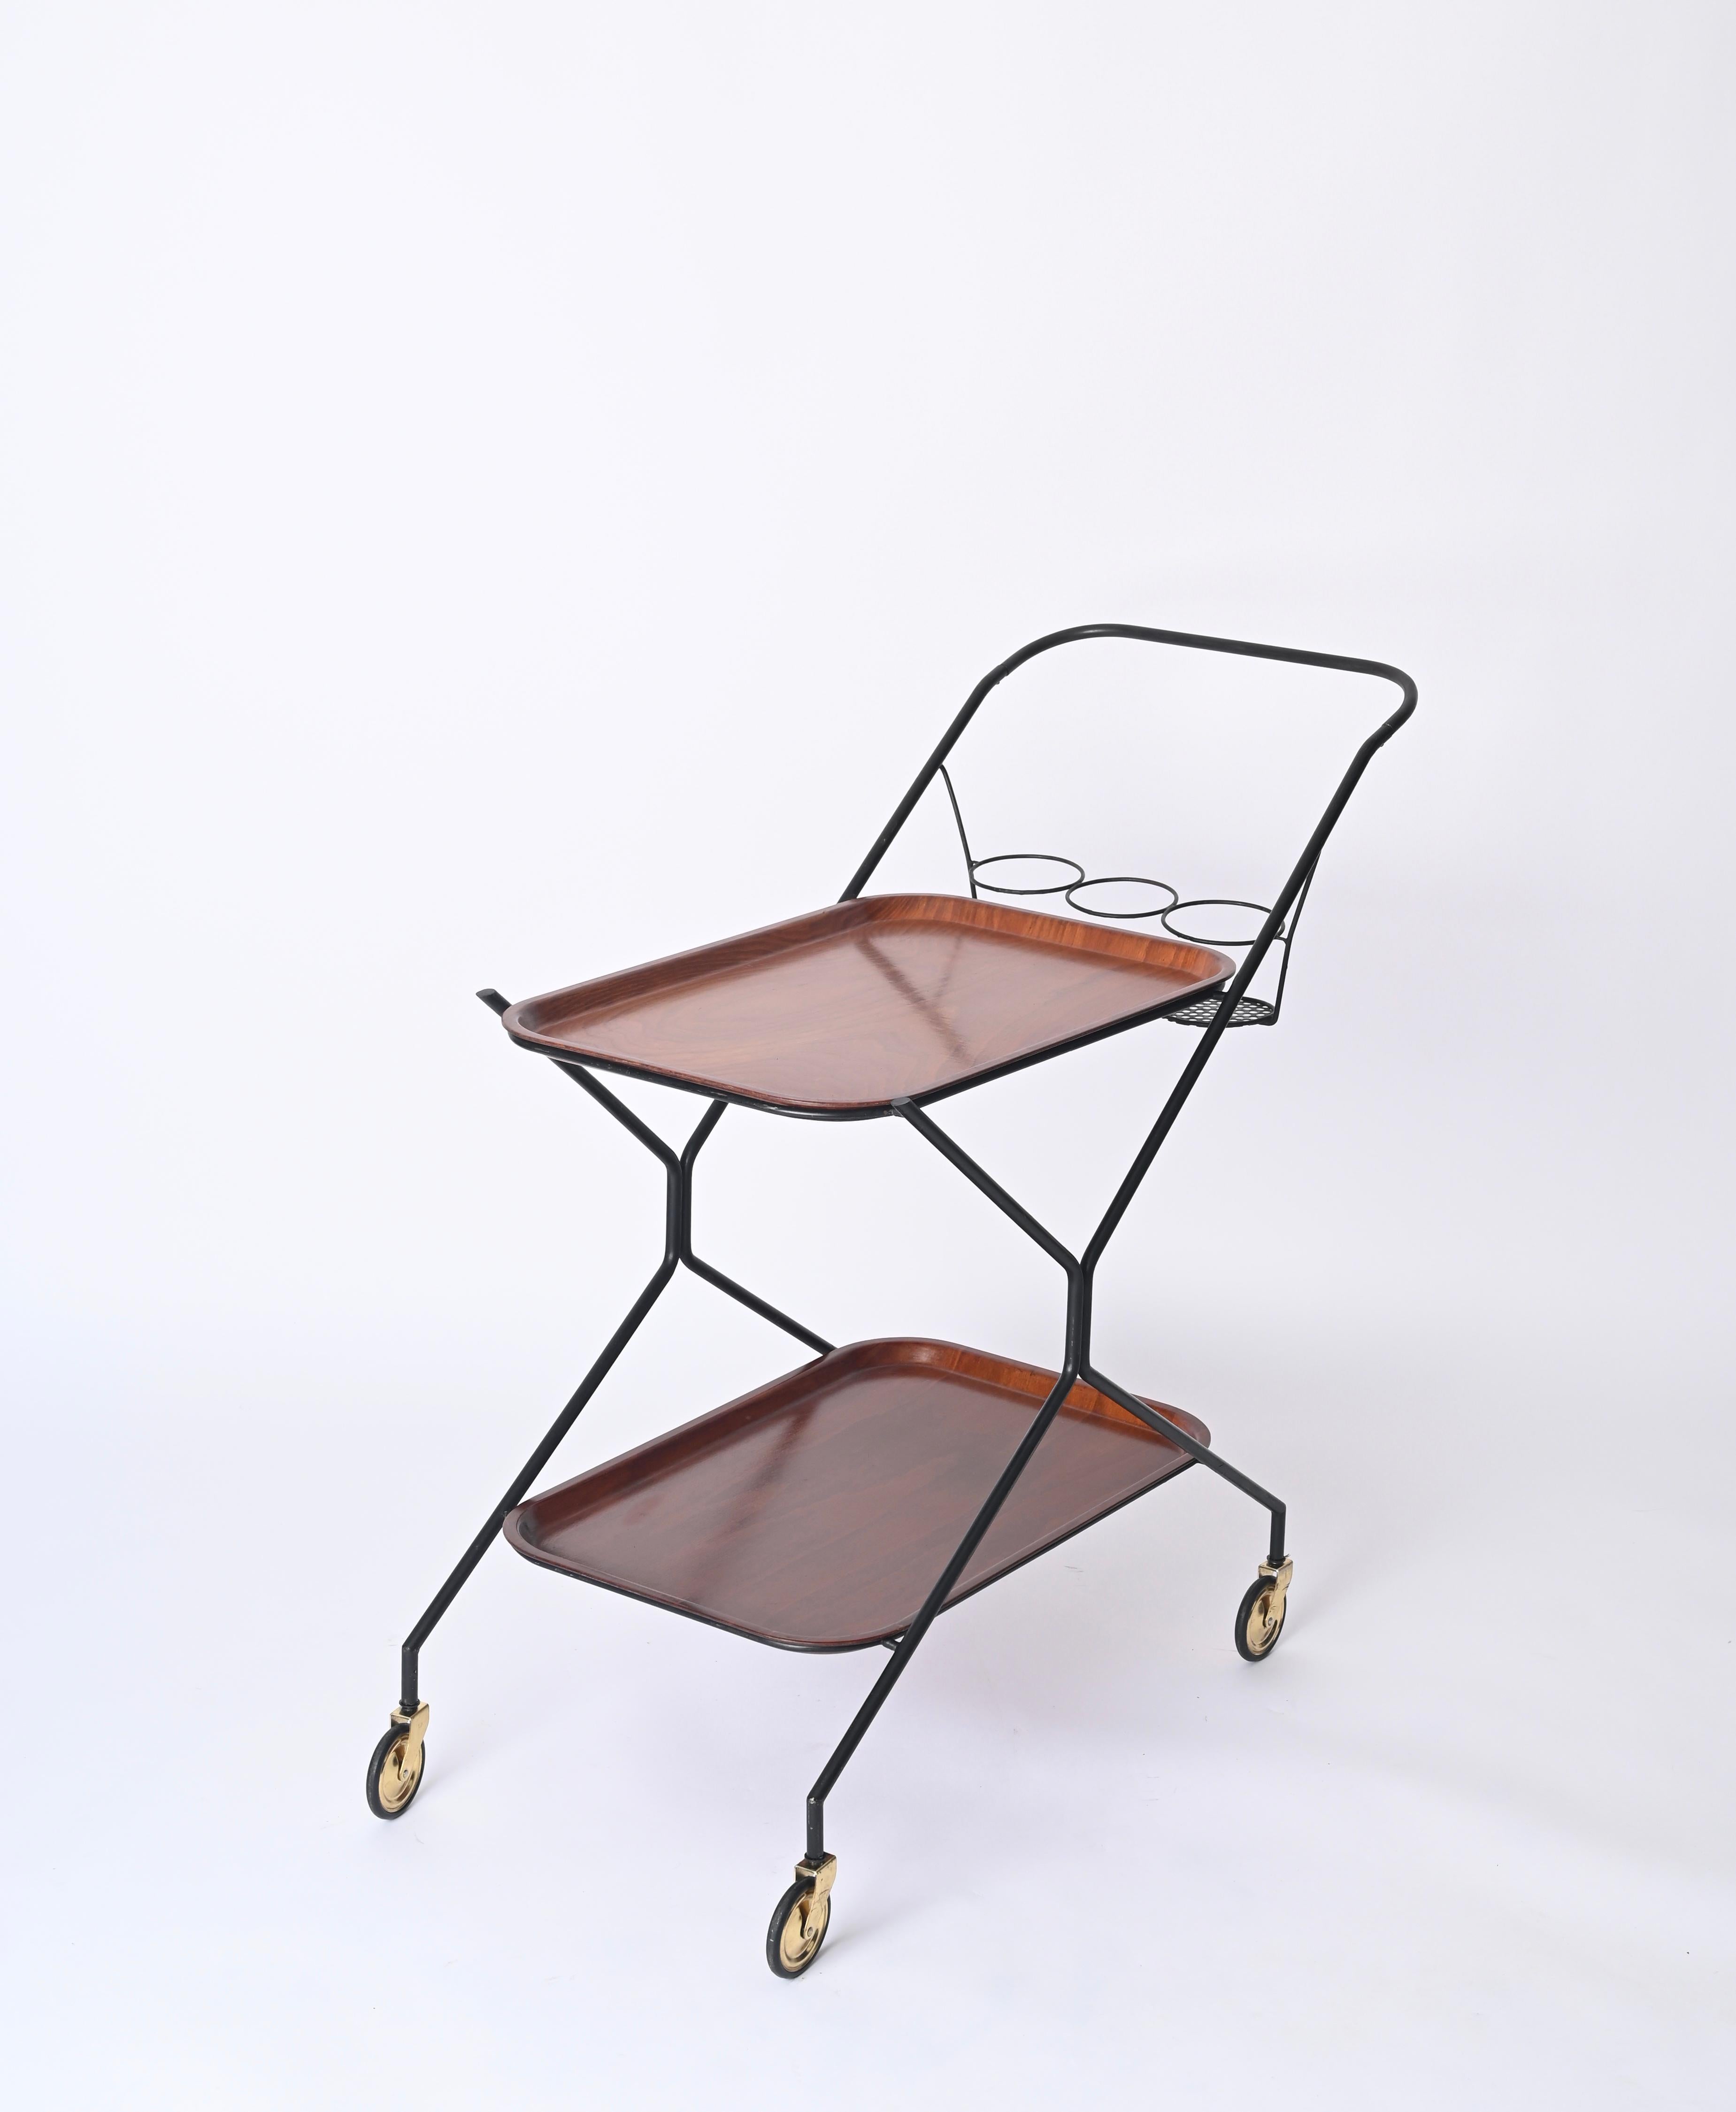 Italian Serving Bar Cart with Bottle Holder, Wood, Metal and Brass, Italy, 1960s For Sale 7